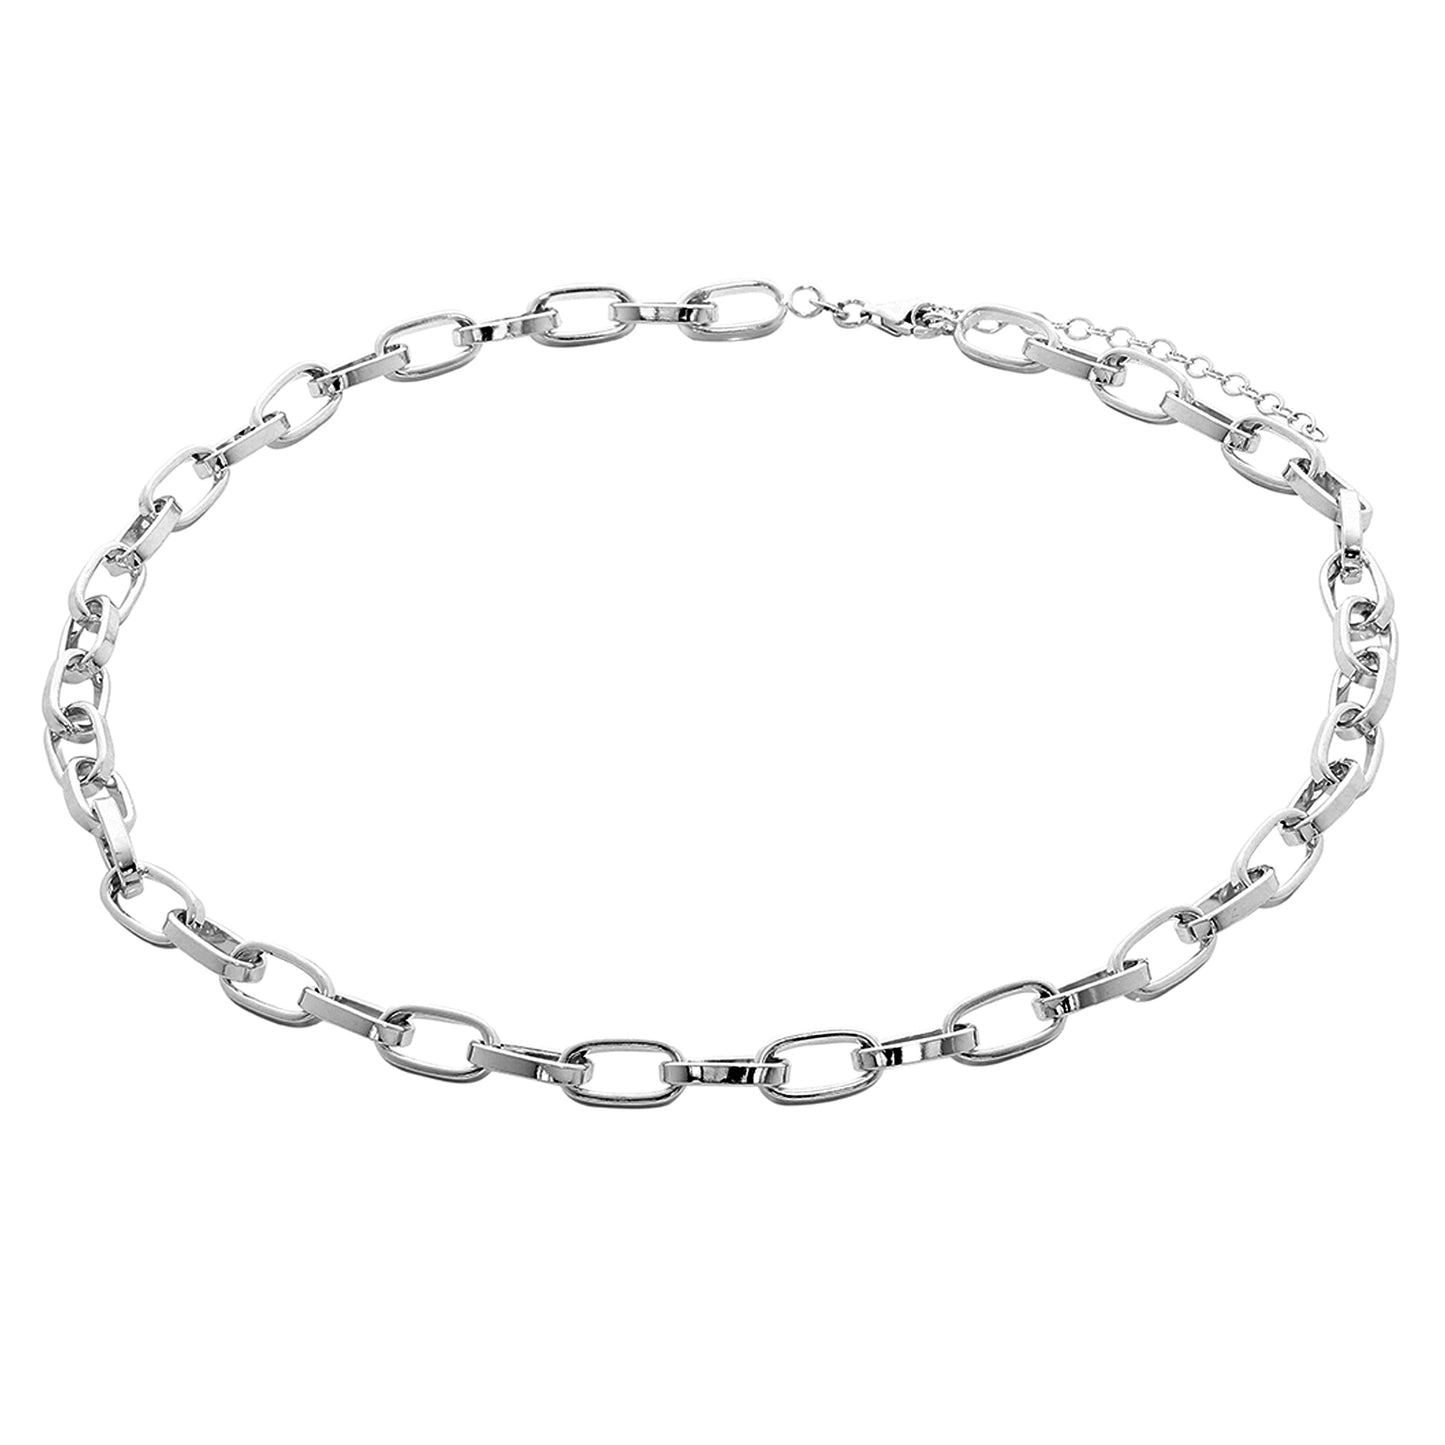 Sterling Silver Link Chain Adjustable Necklace 16 - 18 Inches